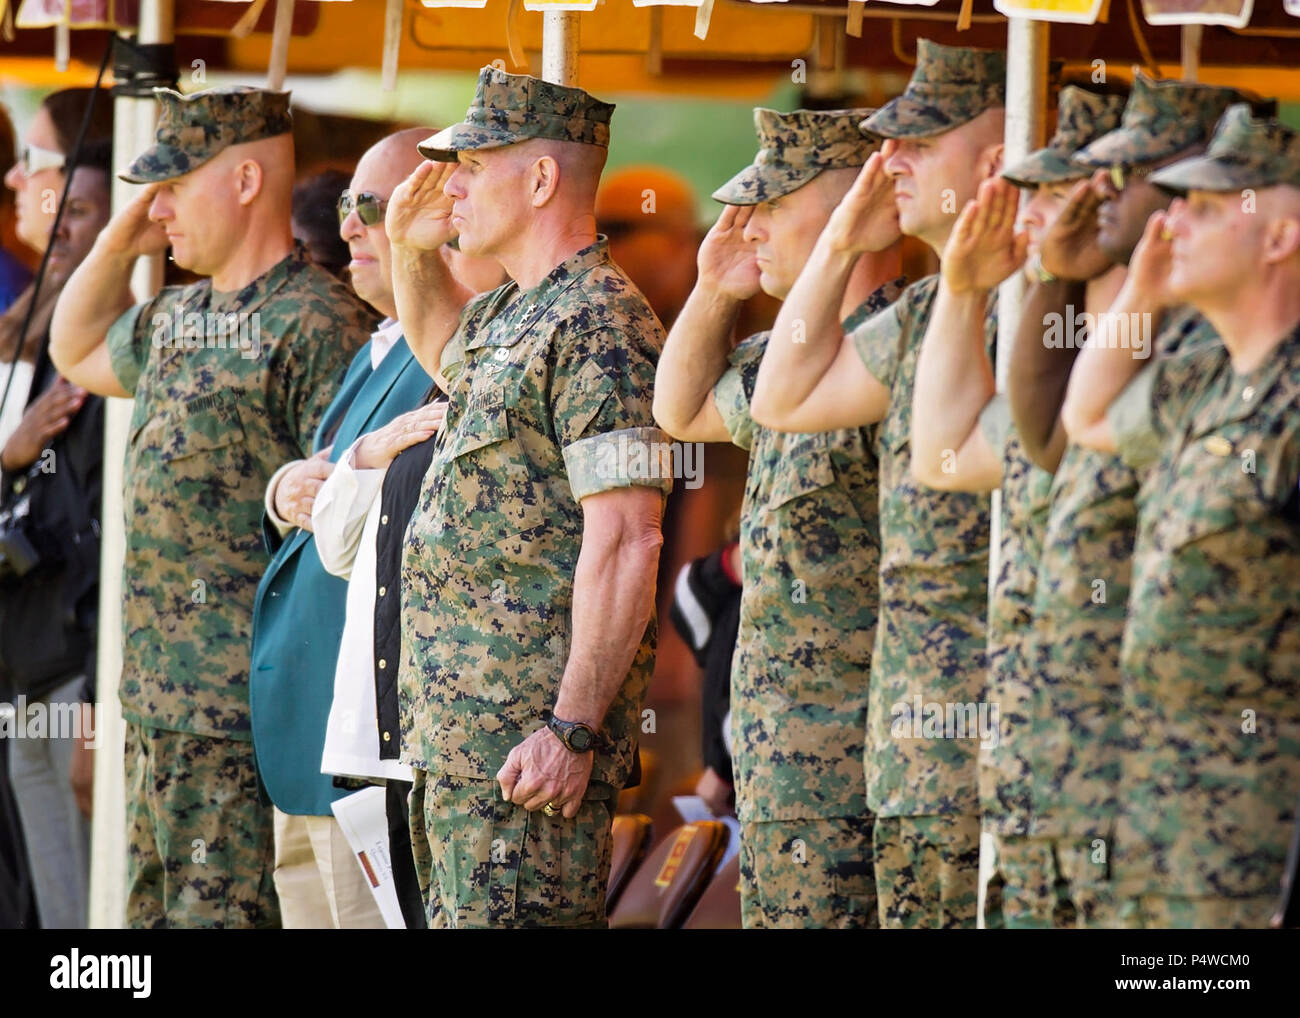 Attendees of the Centennial Celebration Ceremony salute during the playing of the national anthem at Lejeune Field, Marine Corps Base (MCB) Quantico, Va., May 10, 2017. The event commemorates the founding of MCB Quantico in 1917, and consisted of performances by the U.S. Marine Corps Silent Drill Platoon and the U.S. Marine Drum & Bugle Corps. Stock Photo